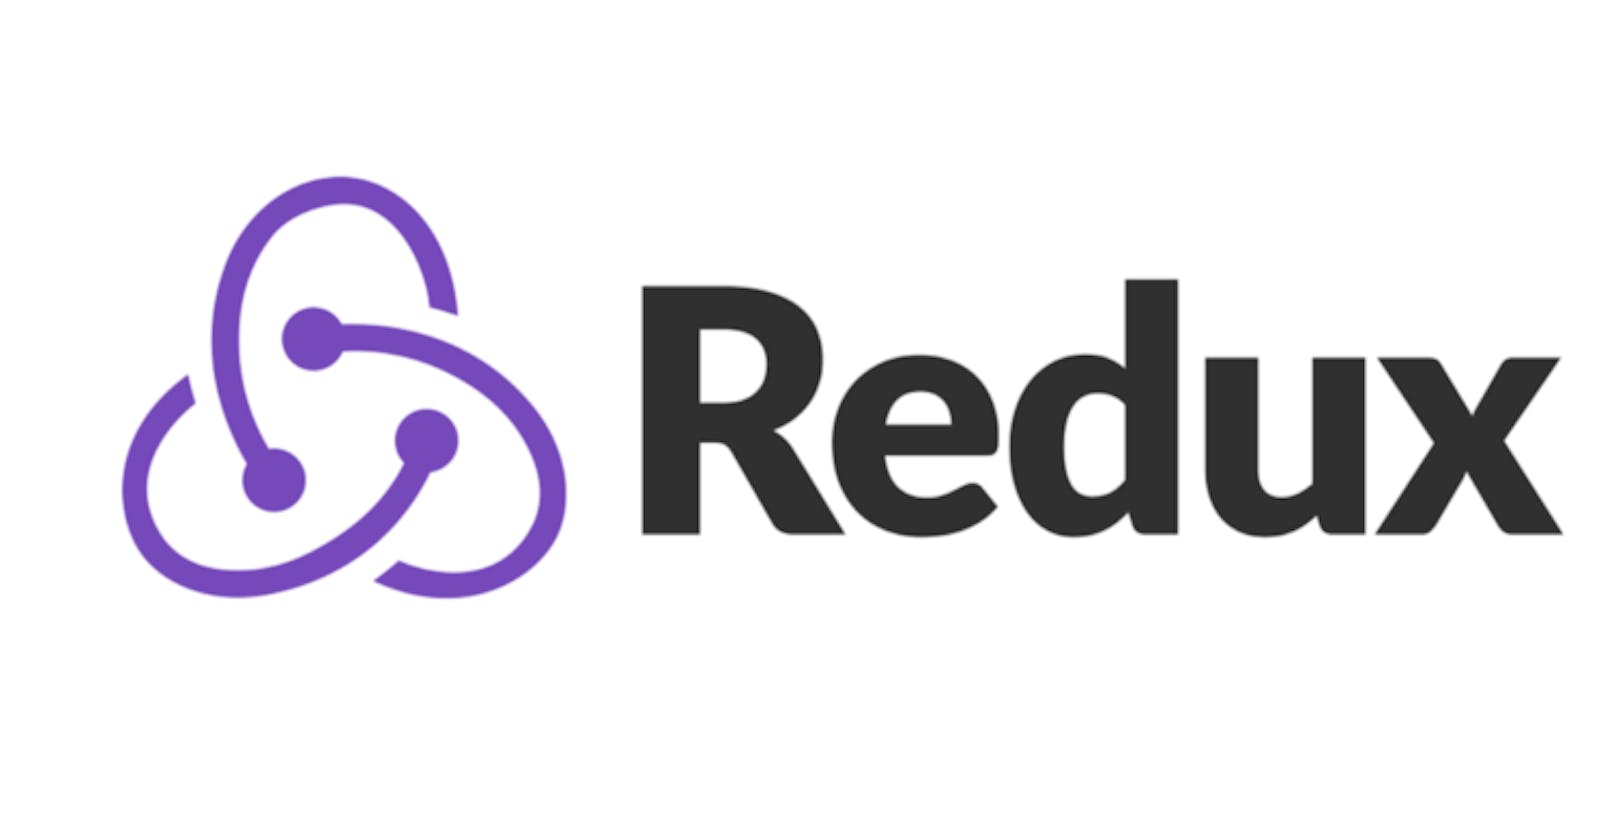 Using Redux Toolkit to Handle Asynchronous Data Requests